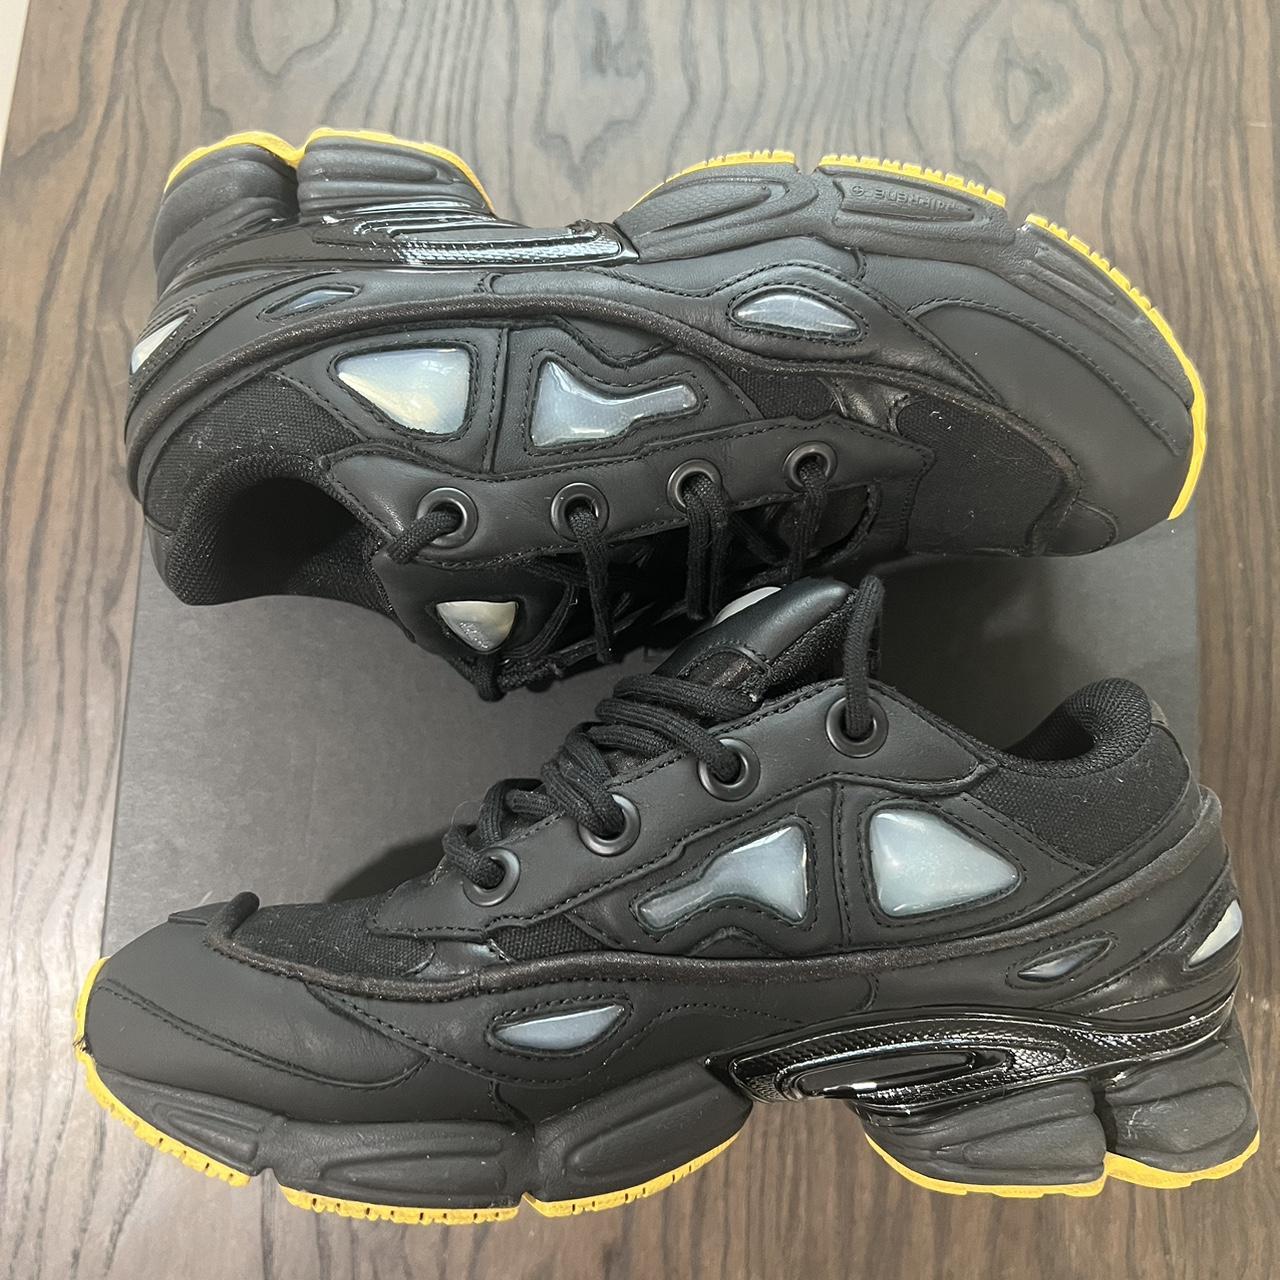 Raf Simons Men's Black and Yellow Trainers